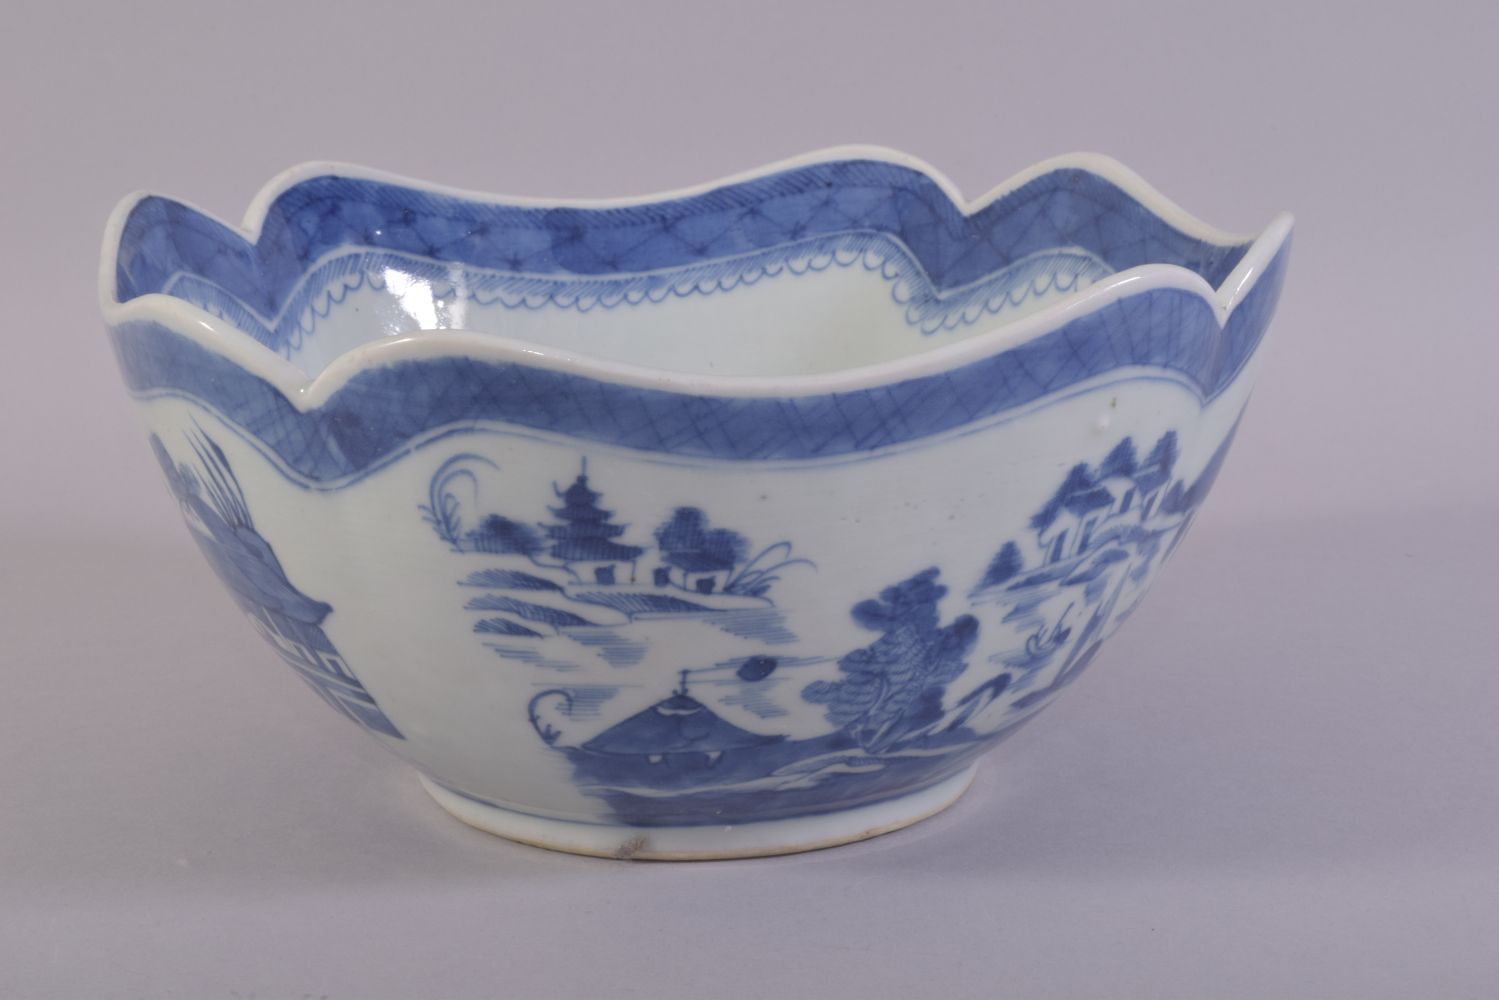 A CHINESE BLUE AND WHITE PORCELAIN BOWL, decorated with a landscape including buildings, boats and - Image 4 of 6